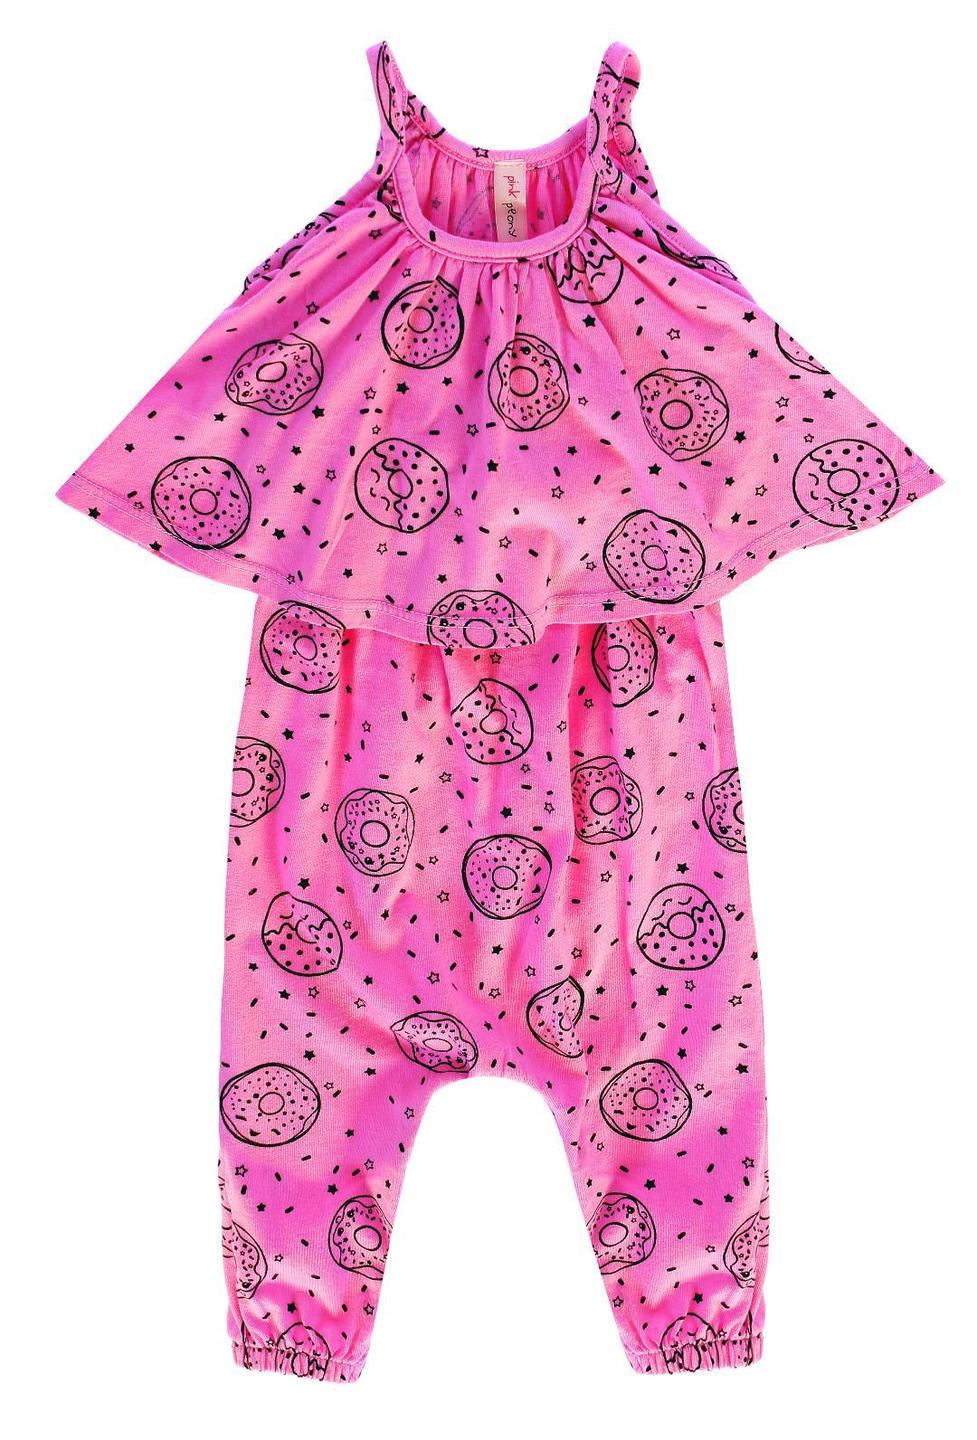 Pink Peony Swing Top Baby Romper Hot Pink Donuts Size 3-6m